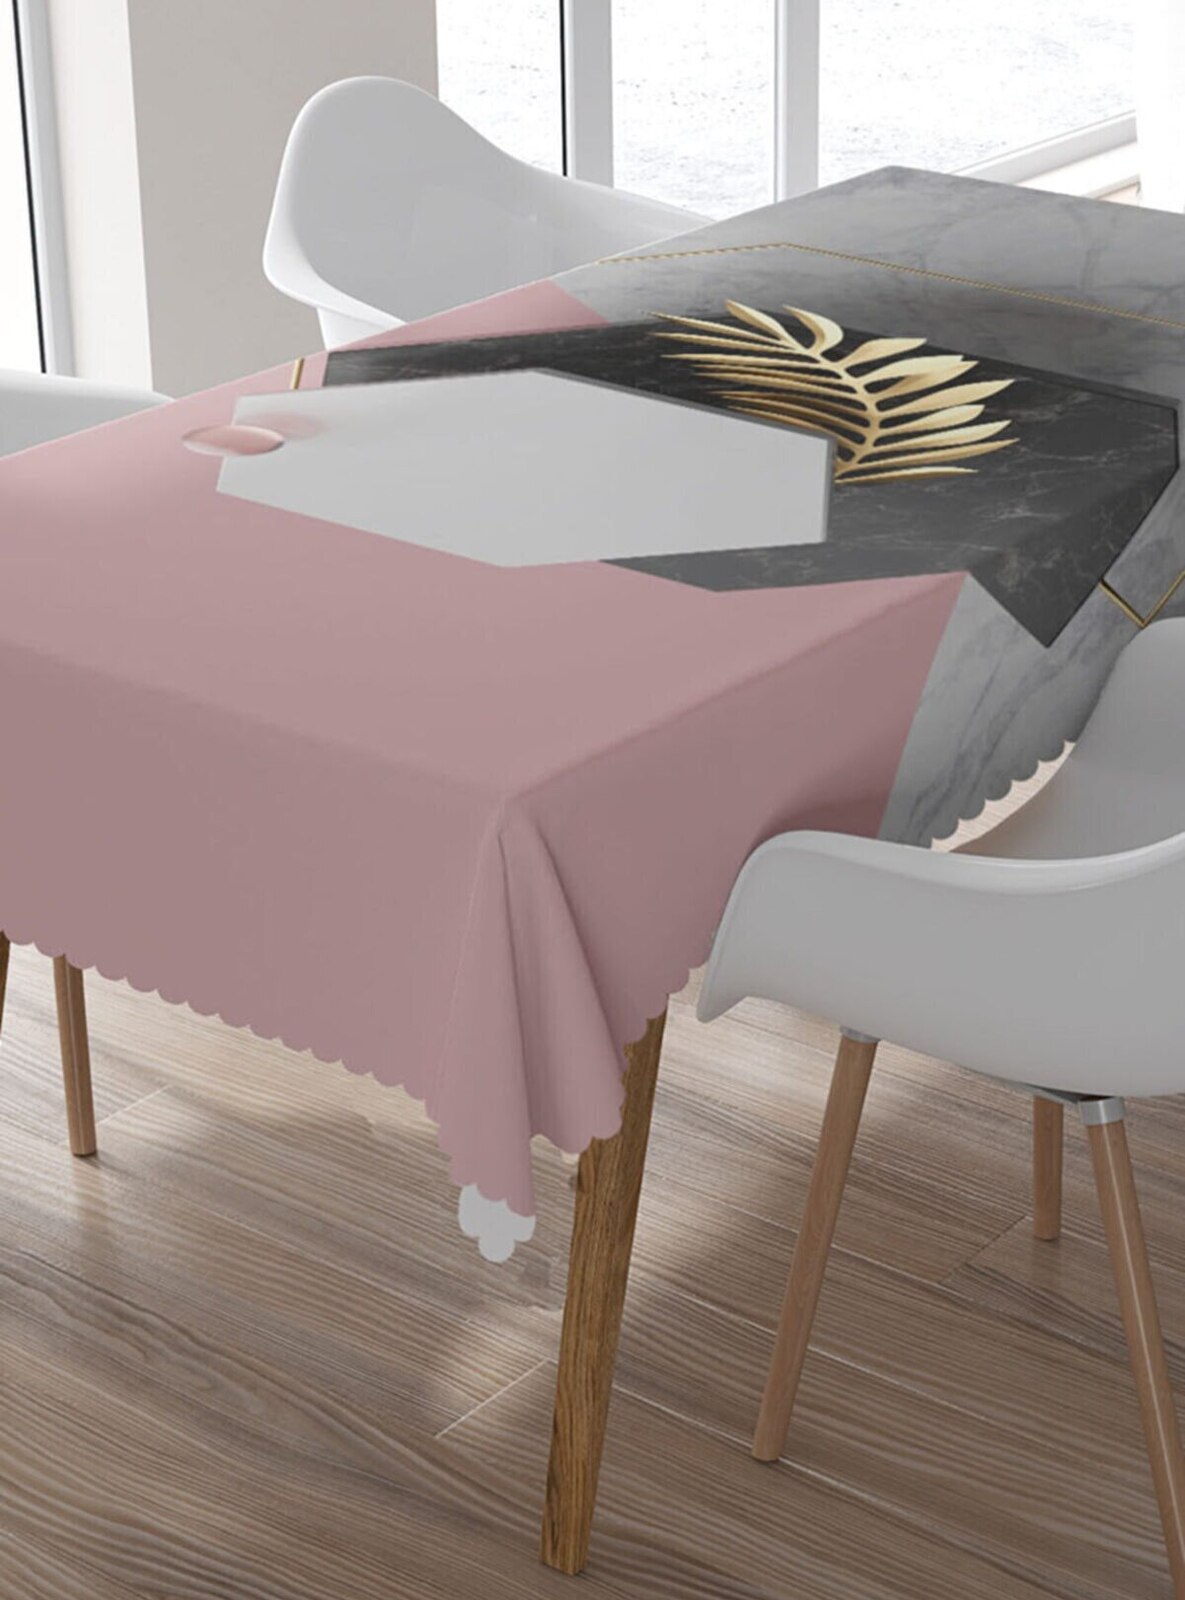  Pink Dinner Table Textiles